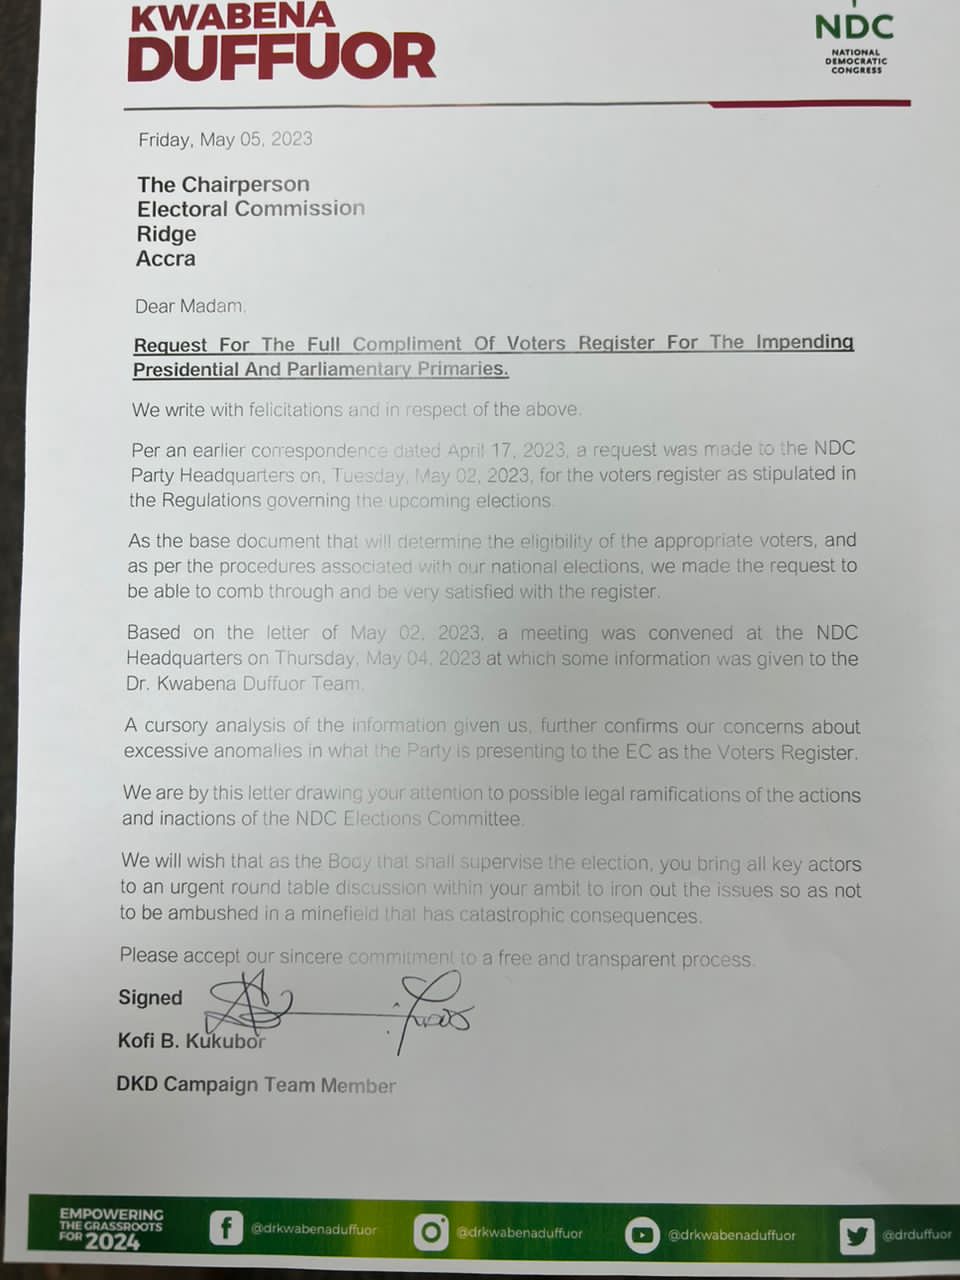 Duffuor campaign's letter to the EC calling for a postponement of the primaries.